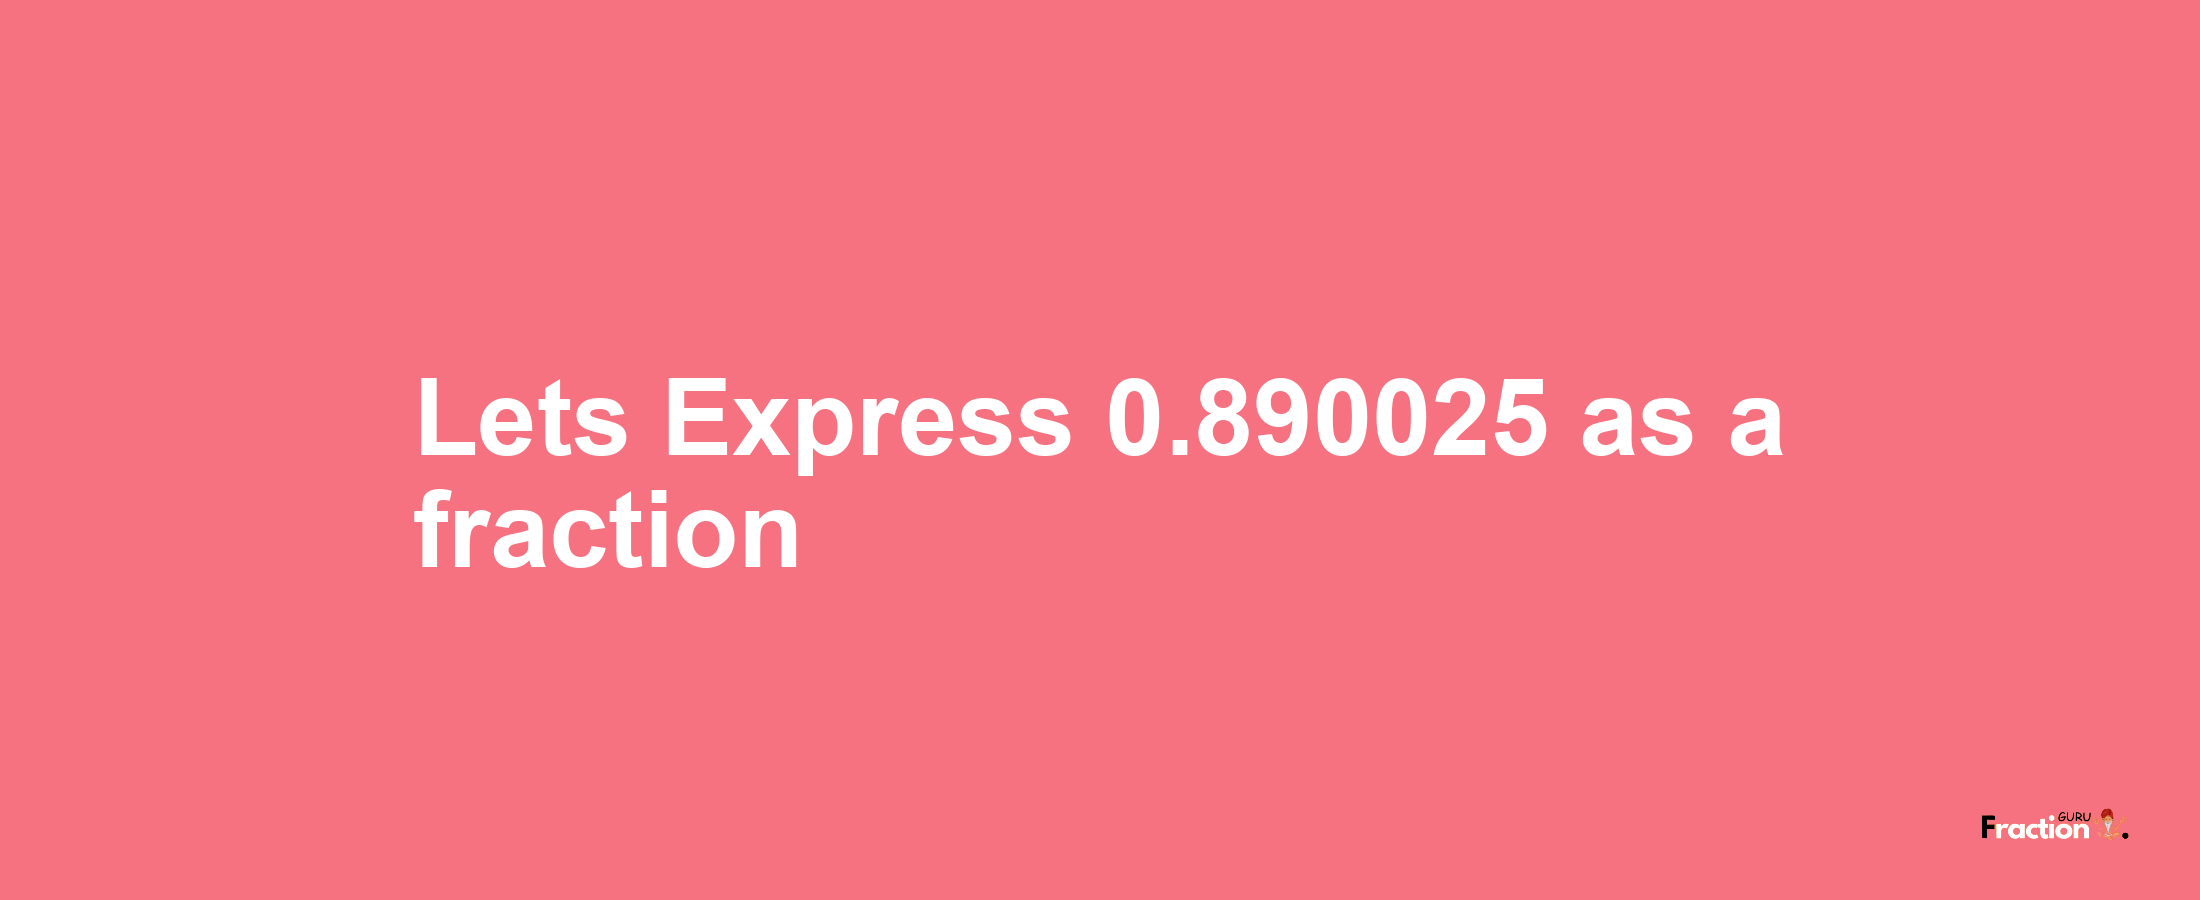 Lets Express 0.890025 as afraction